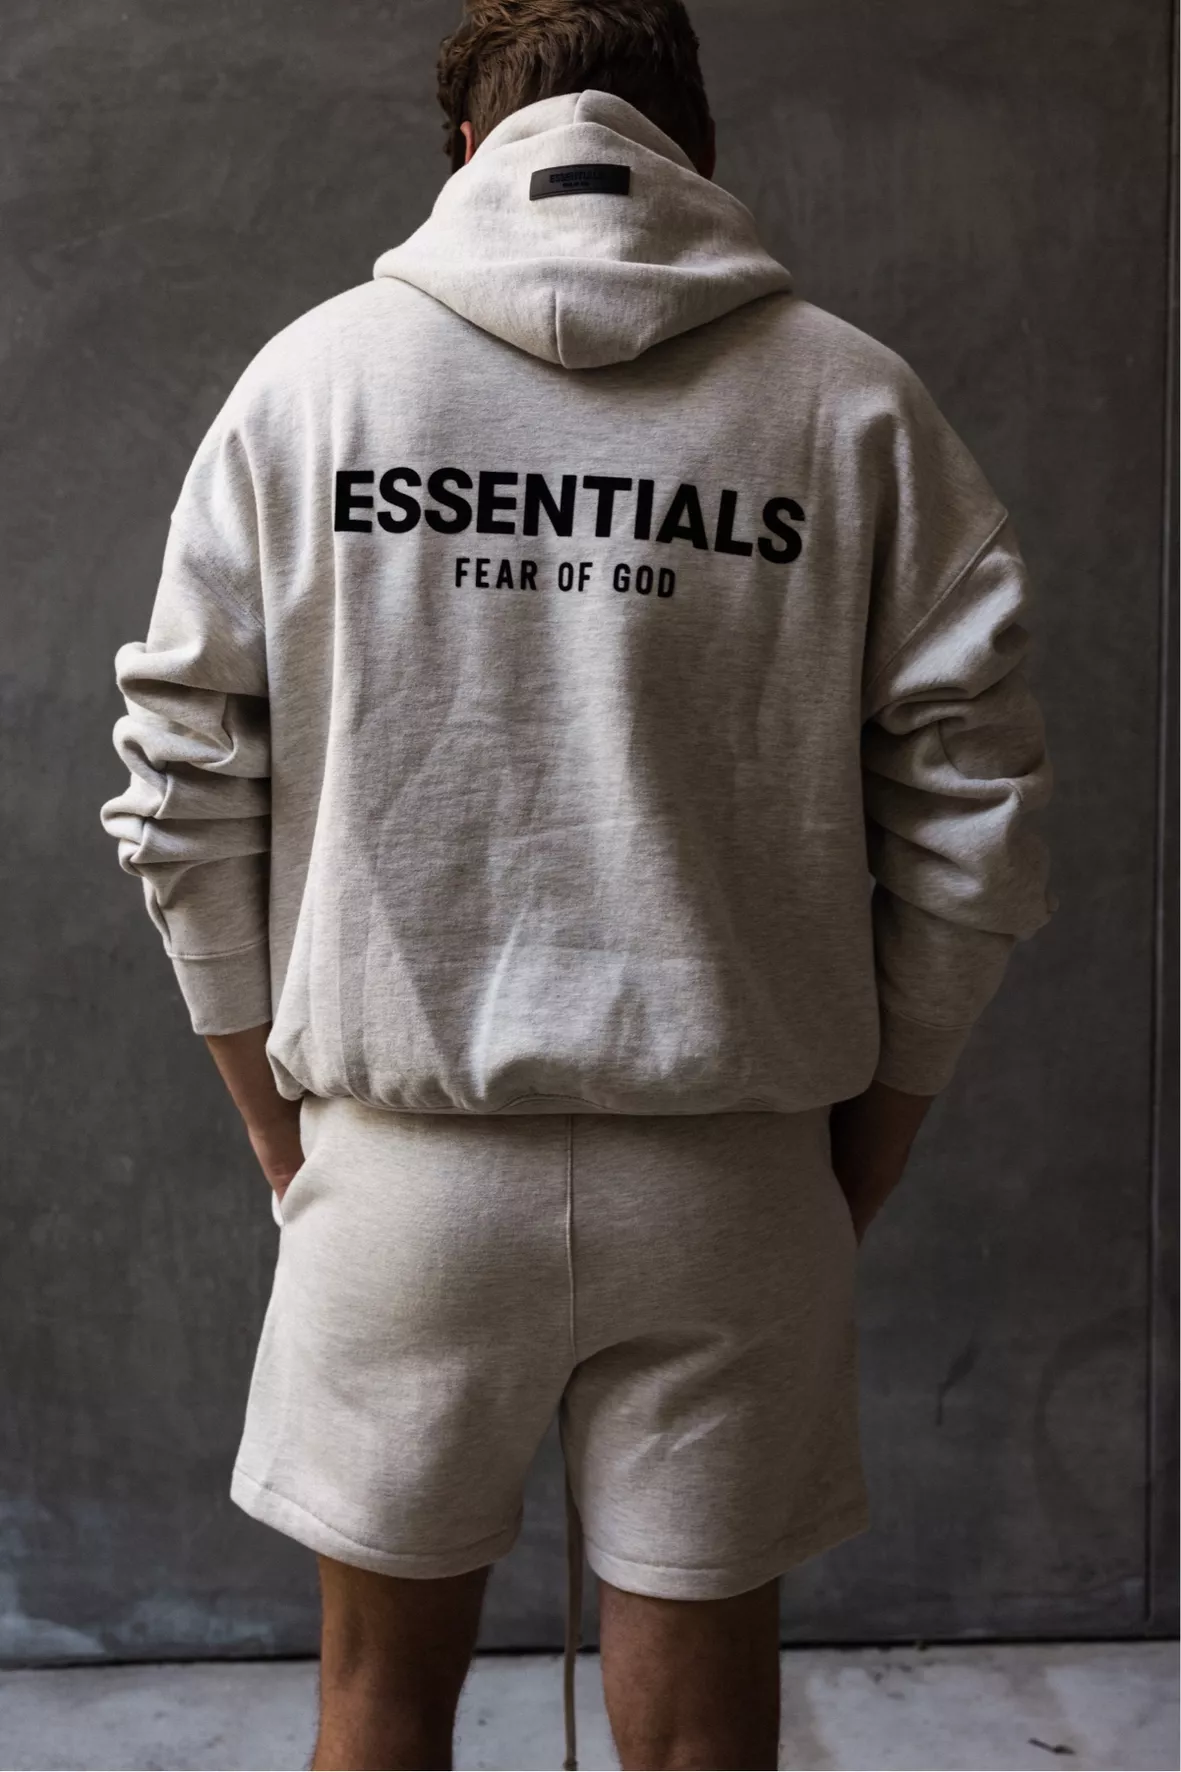 FEAR OF GOD ESSENTIALS HOODIE, Sizing & Fit